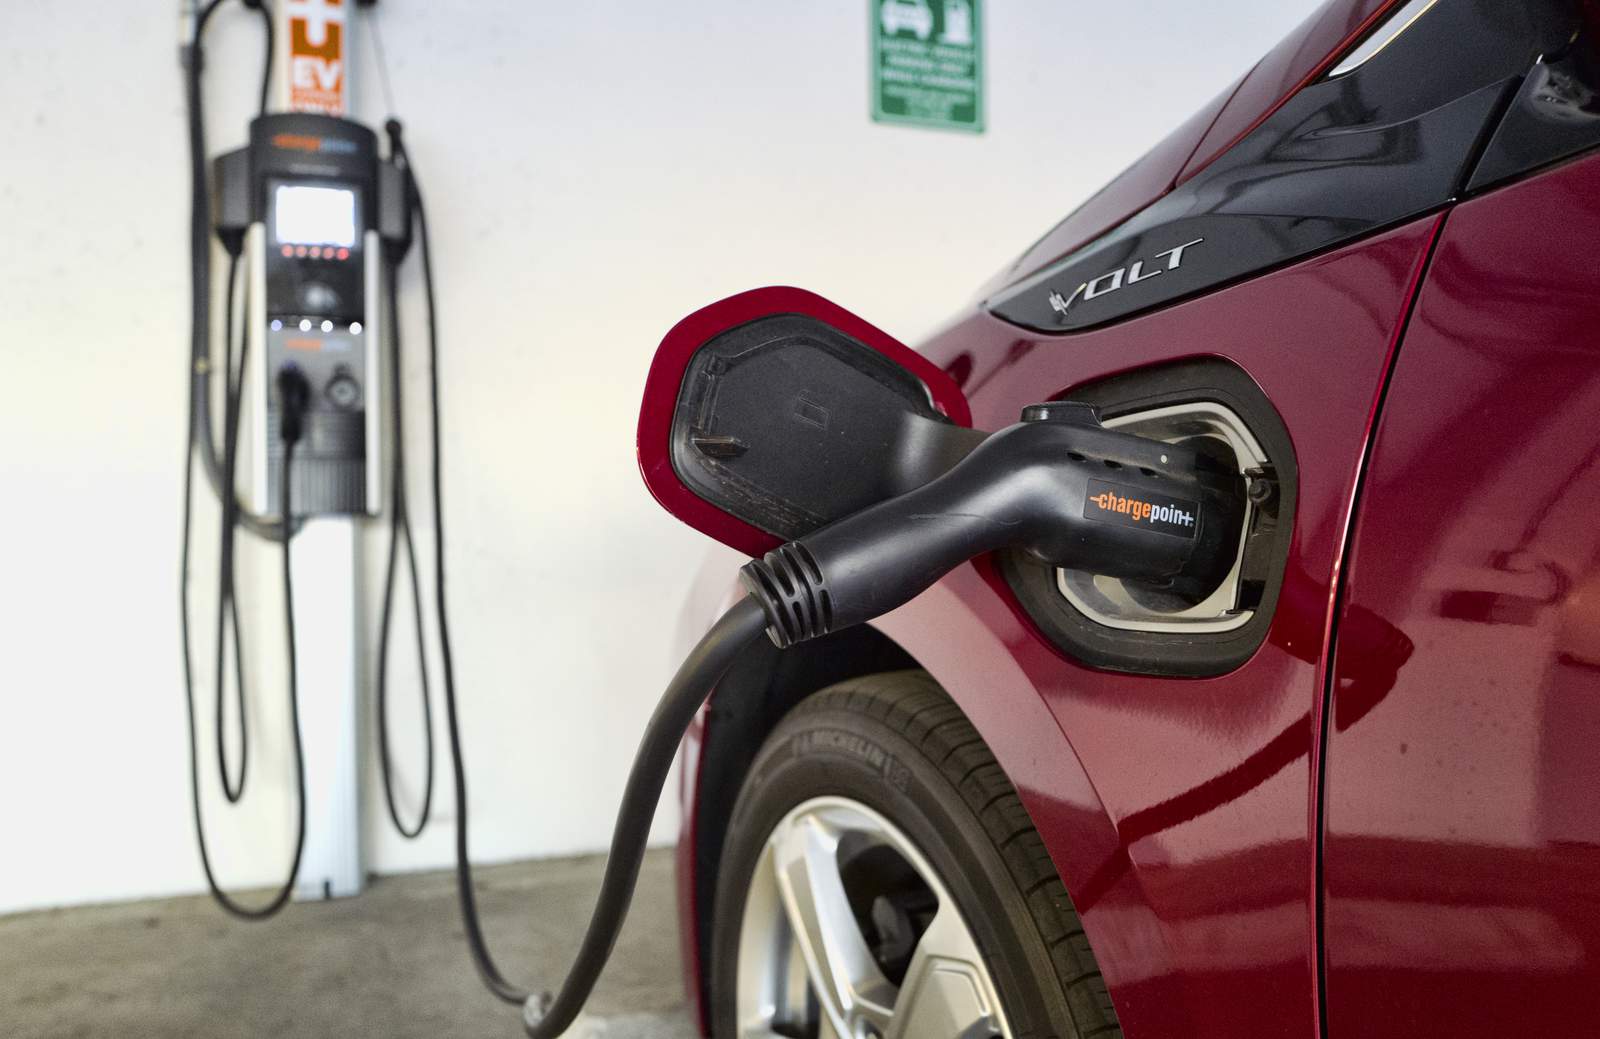 Grants to help fund EV fast charging stations in Michigan